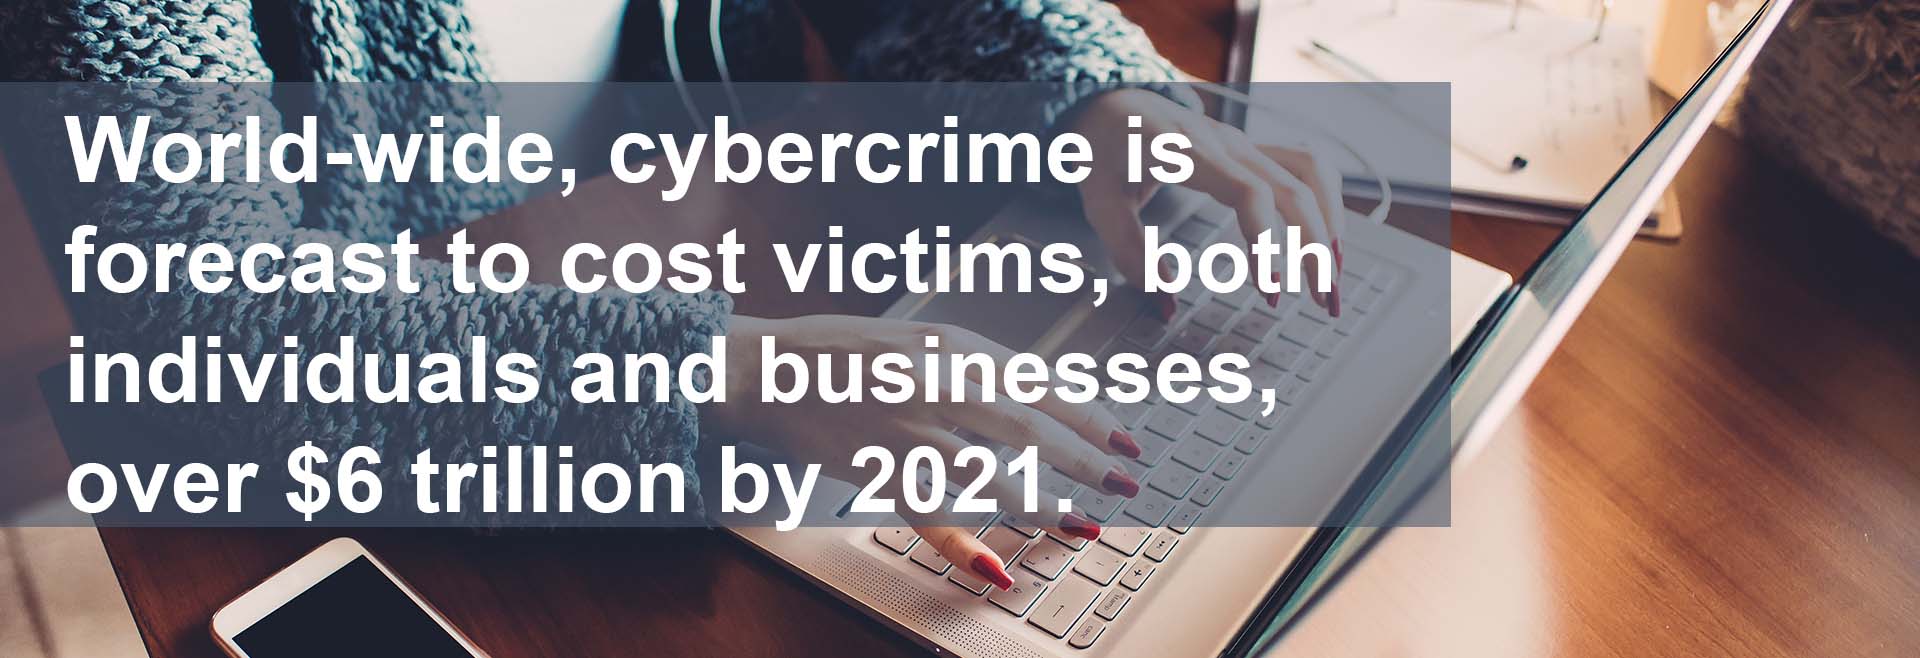 World-wide, cybercrime is forcast to cost victims, both individuals and businesses, over $6 trillion by 2021